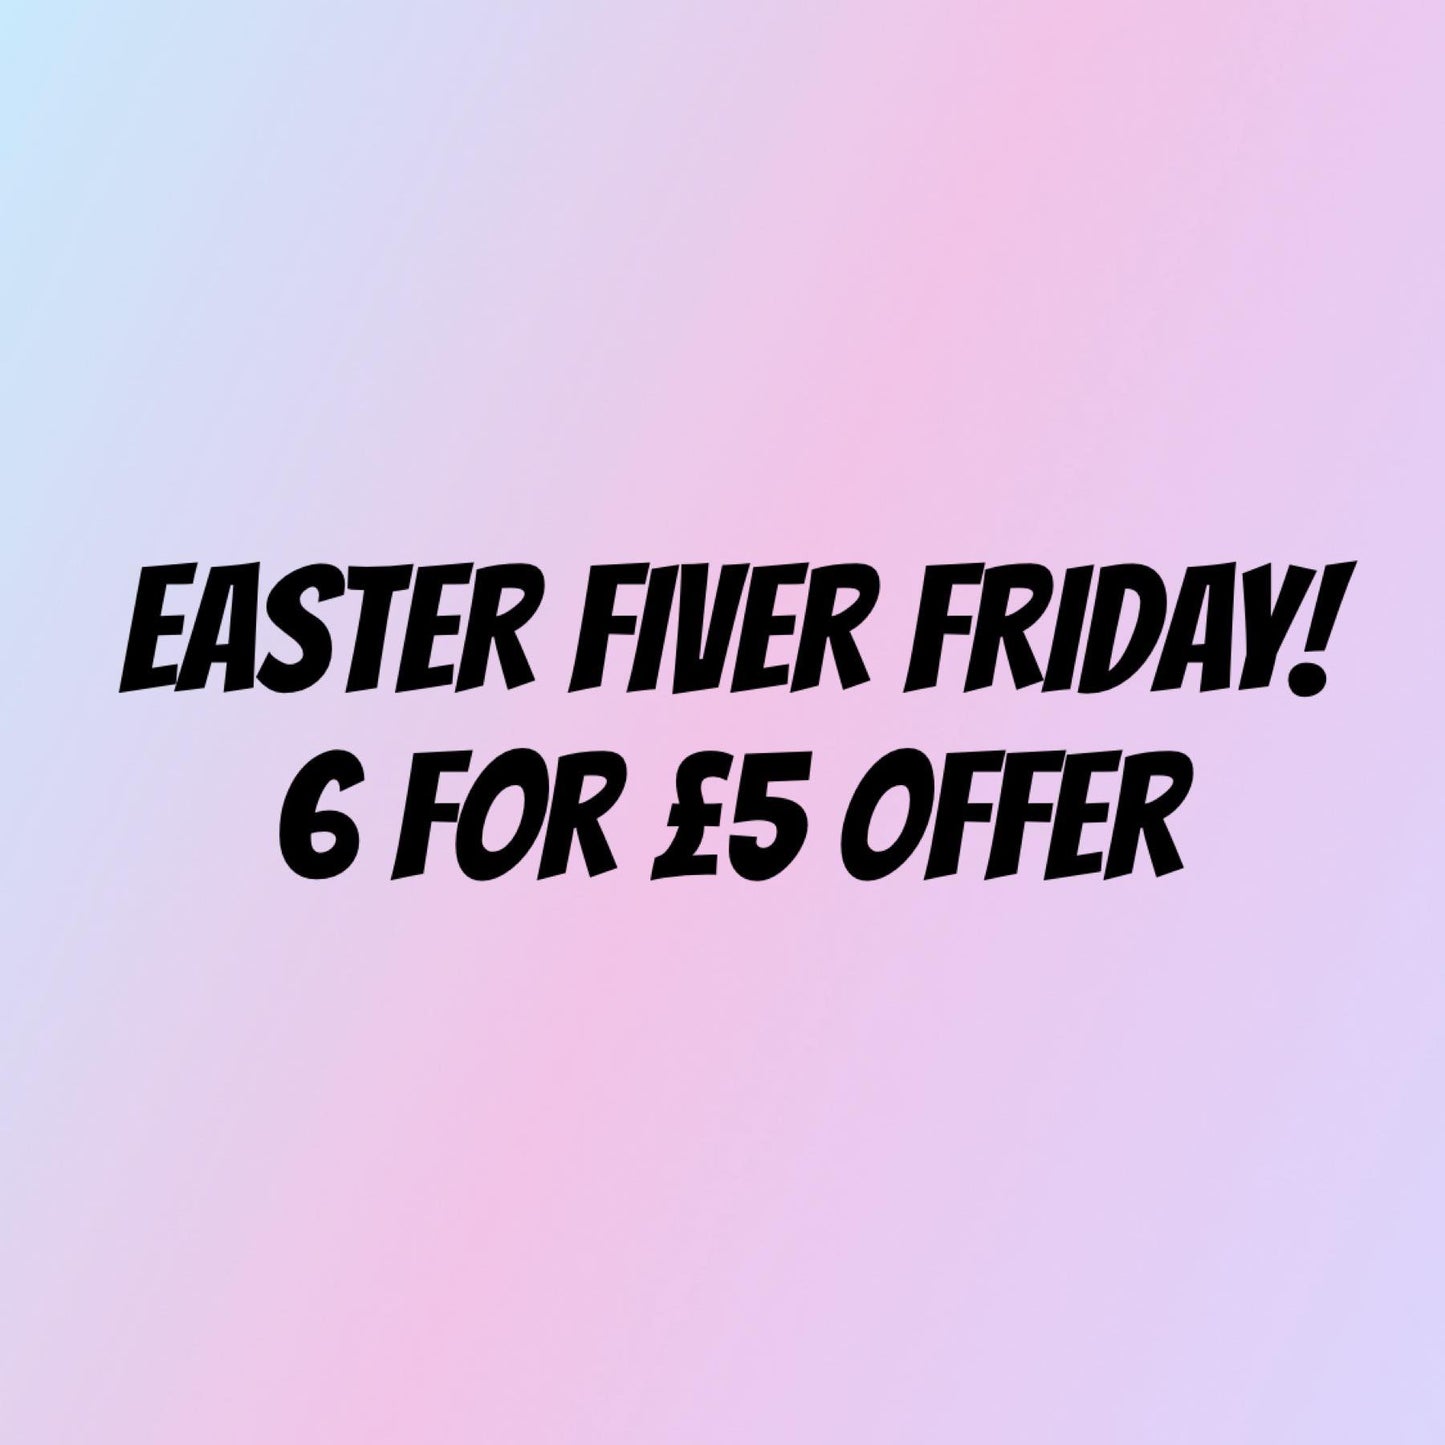 EASTER FIVER FRIDAY - 6 BAGS FOR £5!